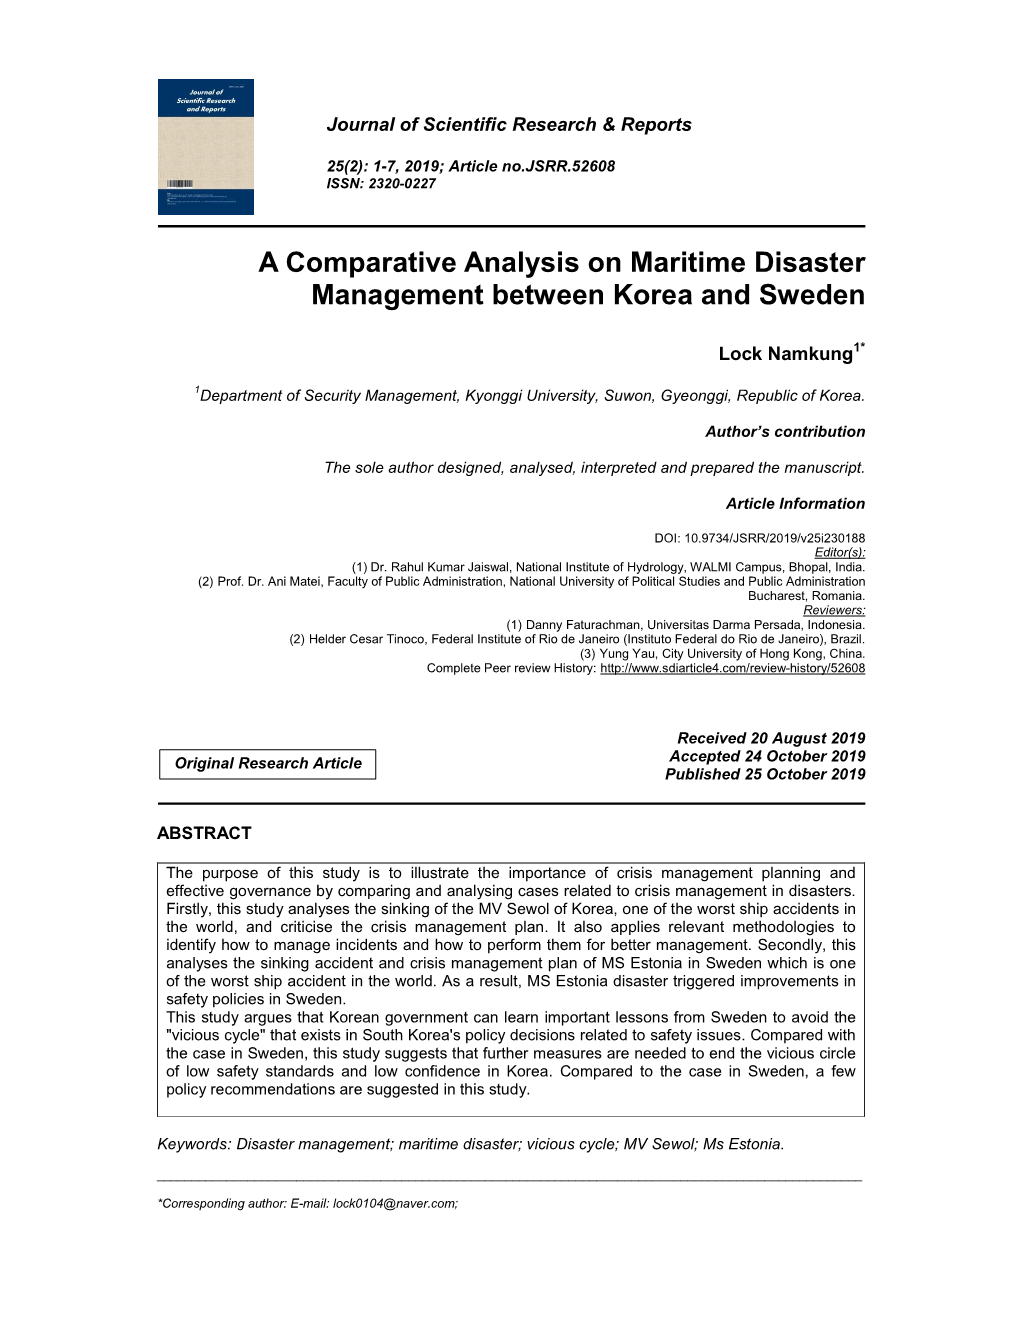 A Comparative Analysis on Maritime Disaster Management Between Korea and Sweden